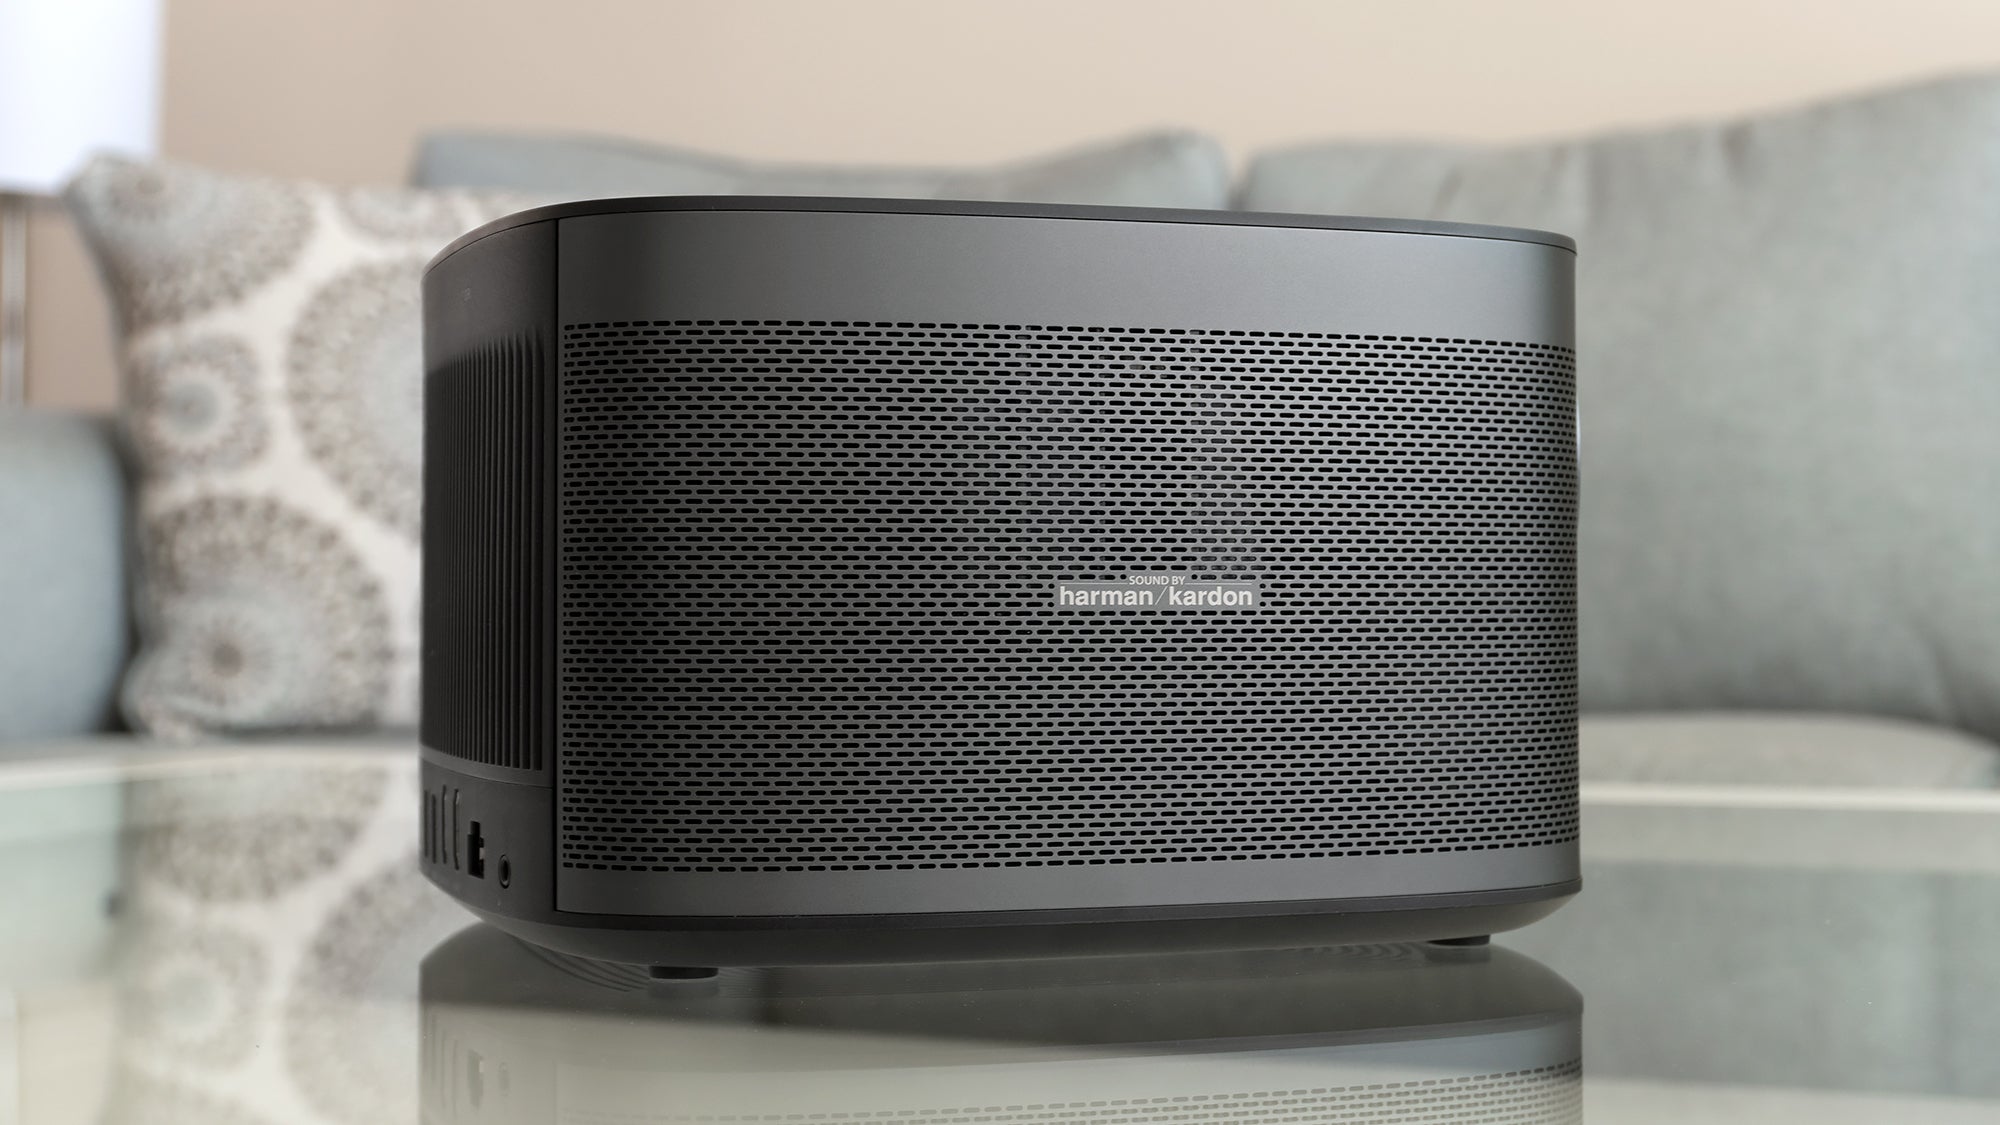 They won't give you a surround sound experience, but the built-in 8-watt speakers are plenty loud and clear for any room. (Photo: Andrew Liszewski/Gizmodo)